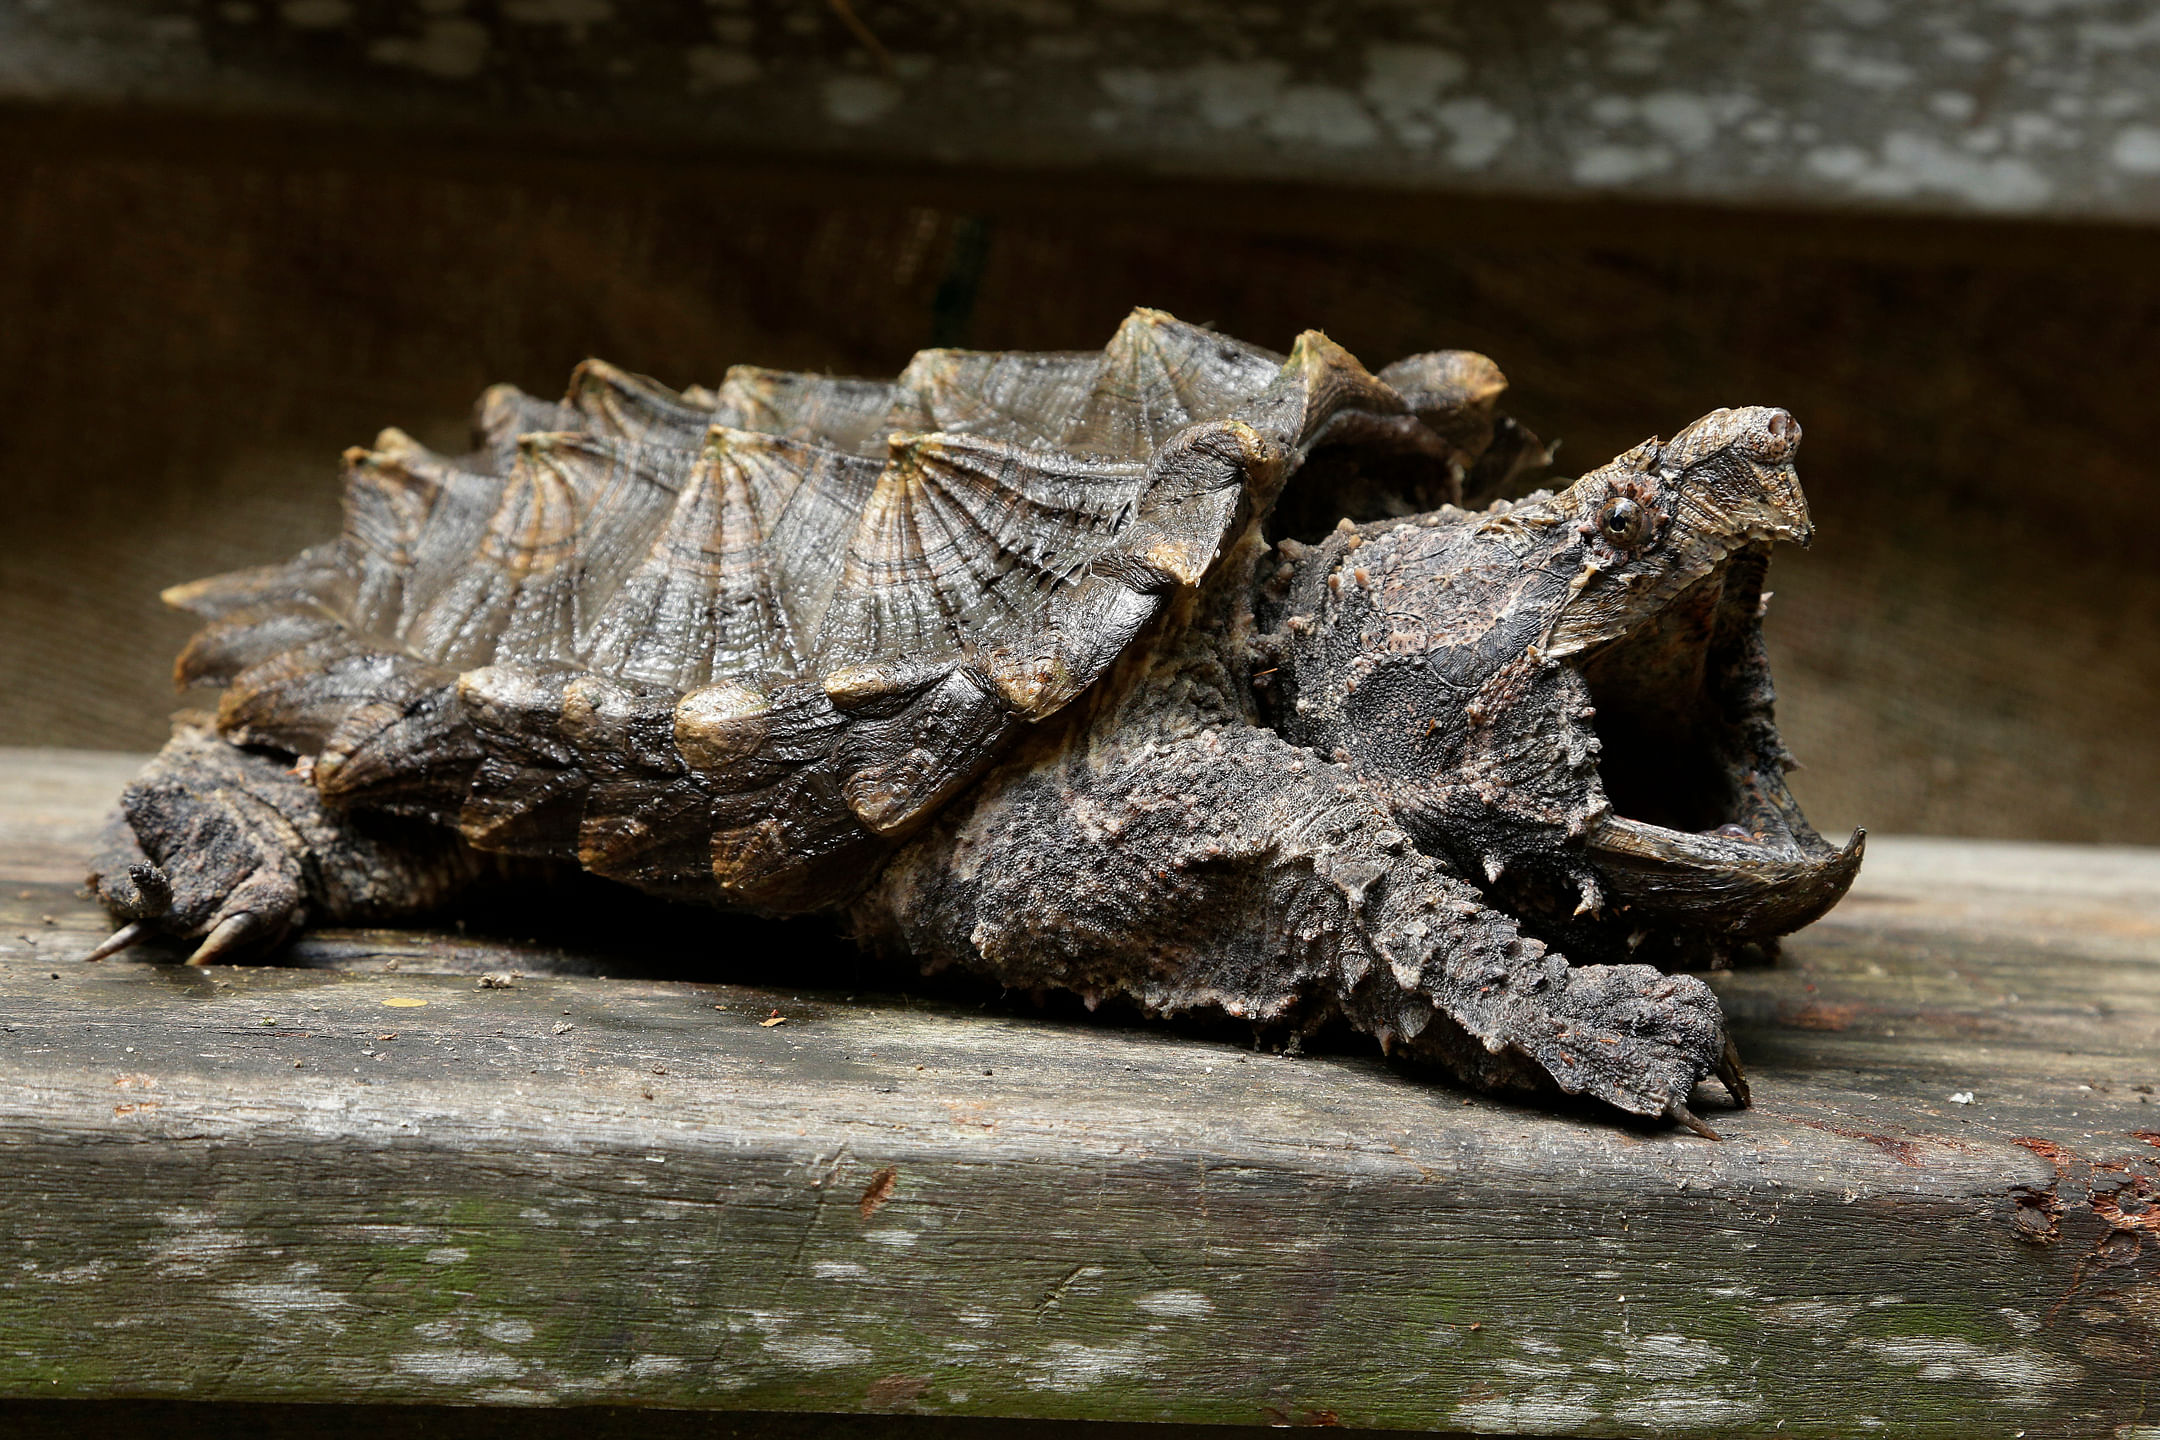 The alligator snapping turtle is a dangerous predator. 